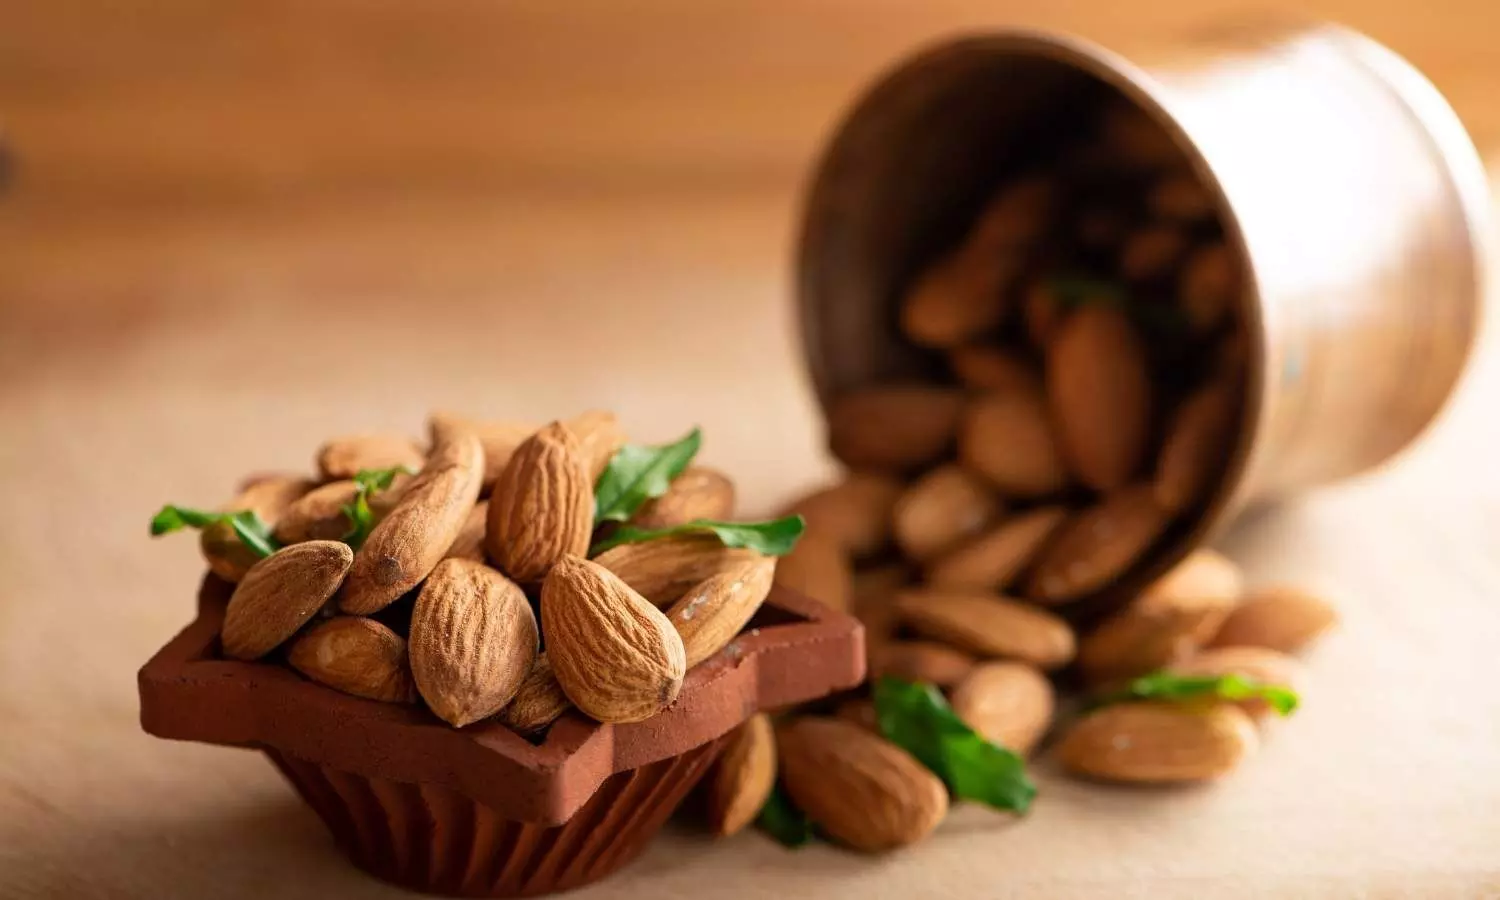 Snacking on almonds can help cut down on extra calories: Study